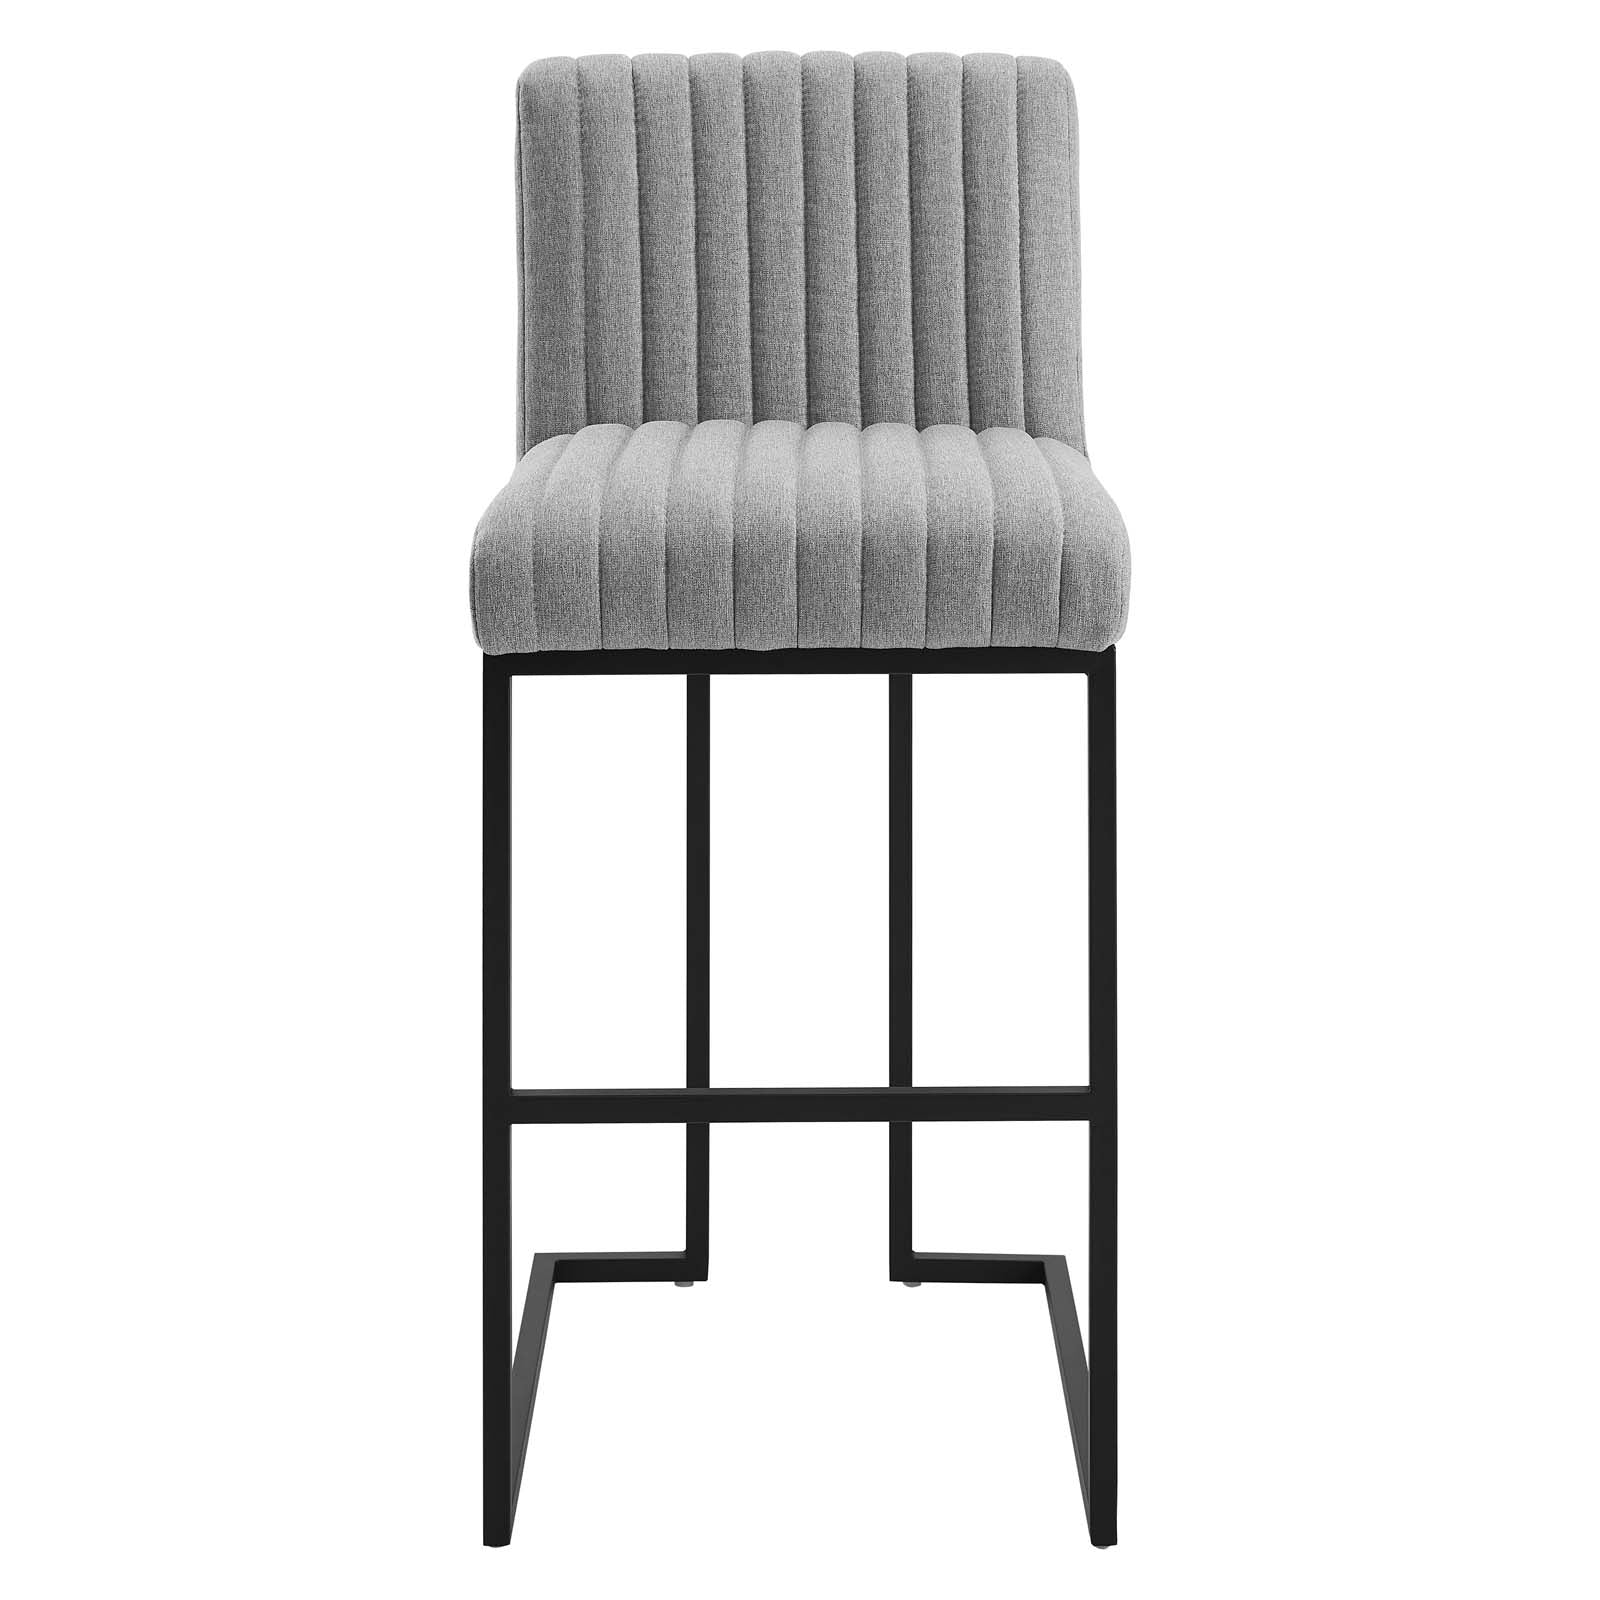 Modway Barstools - Indulge-Channel-Tufted-Fabric-Bar-Stool-Light-Gray